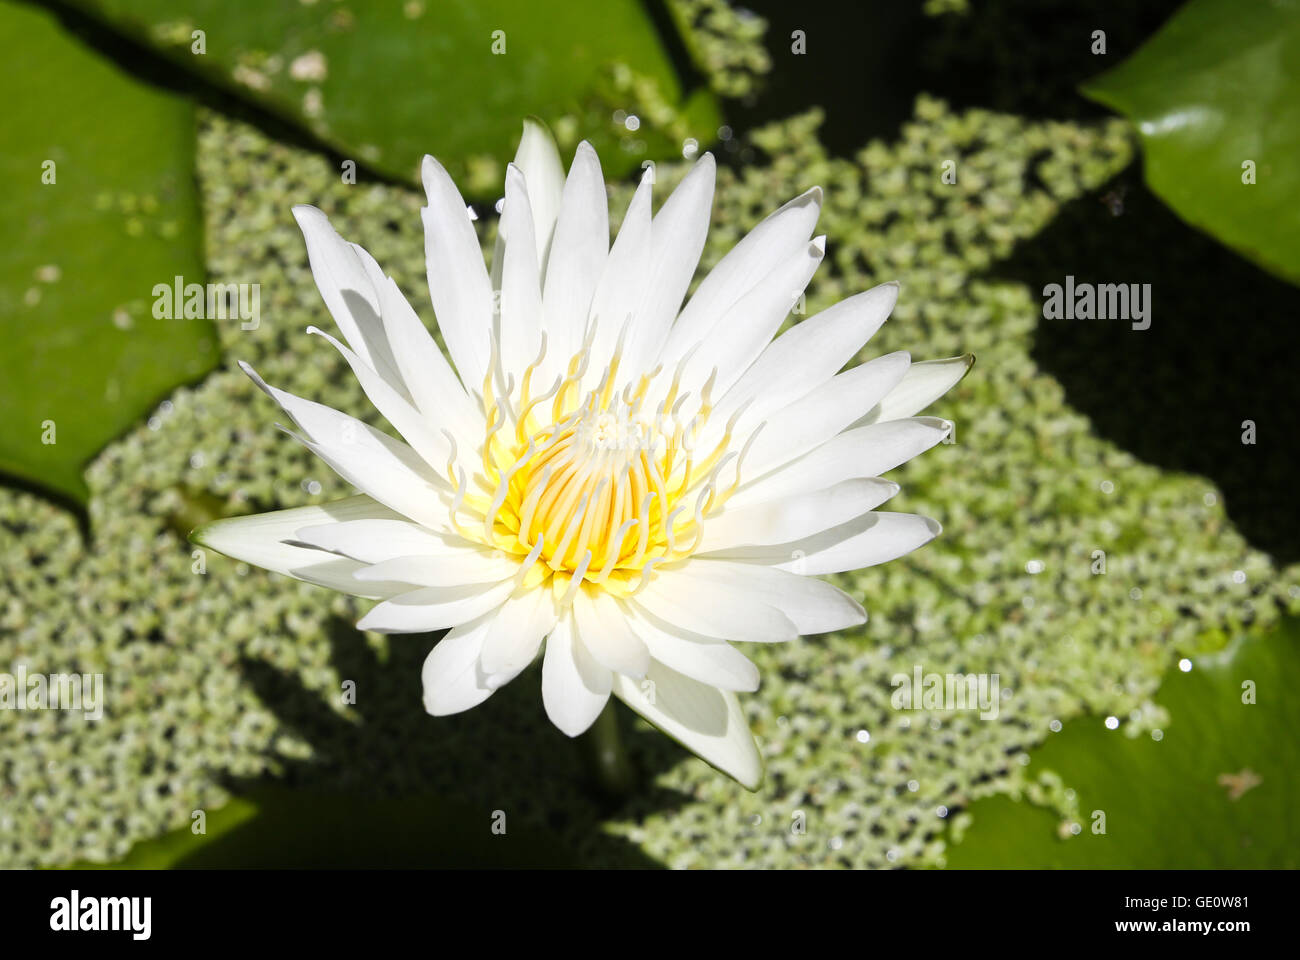 White lotus flower with green leaf background Stock Photo